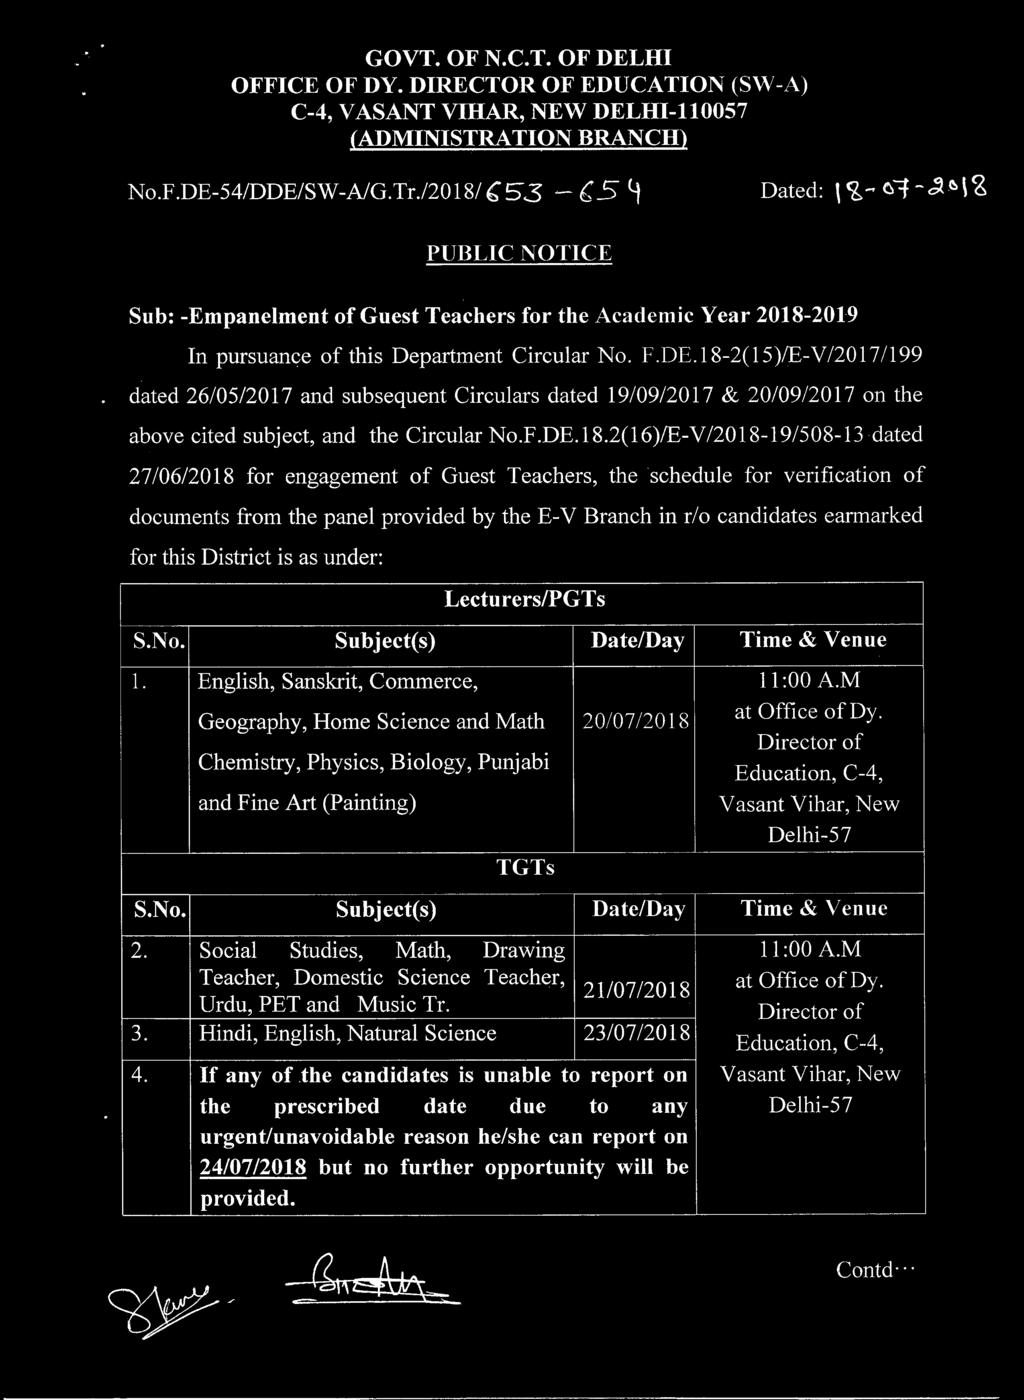 18-2(15)/E-V/2017/199 dated 26/05/2017 and subsequent Circulars dated 19/09/2017 & 20/09/2017 on the above cited subject, and the Circular No.F.DE.18.2(16)/E-V/2018-19/508-13 dated 27/06/2018 for